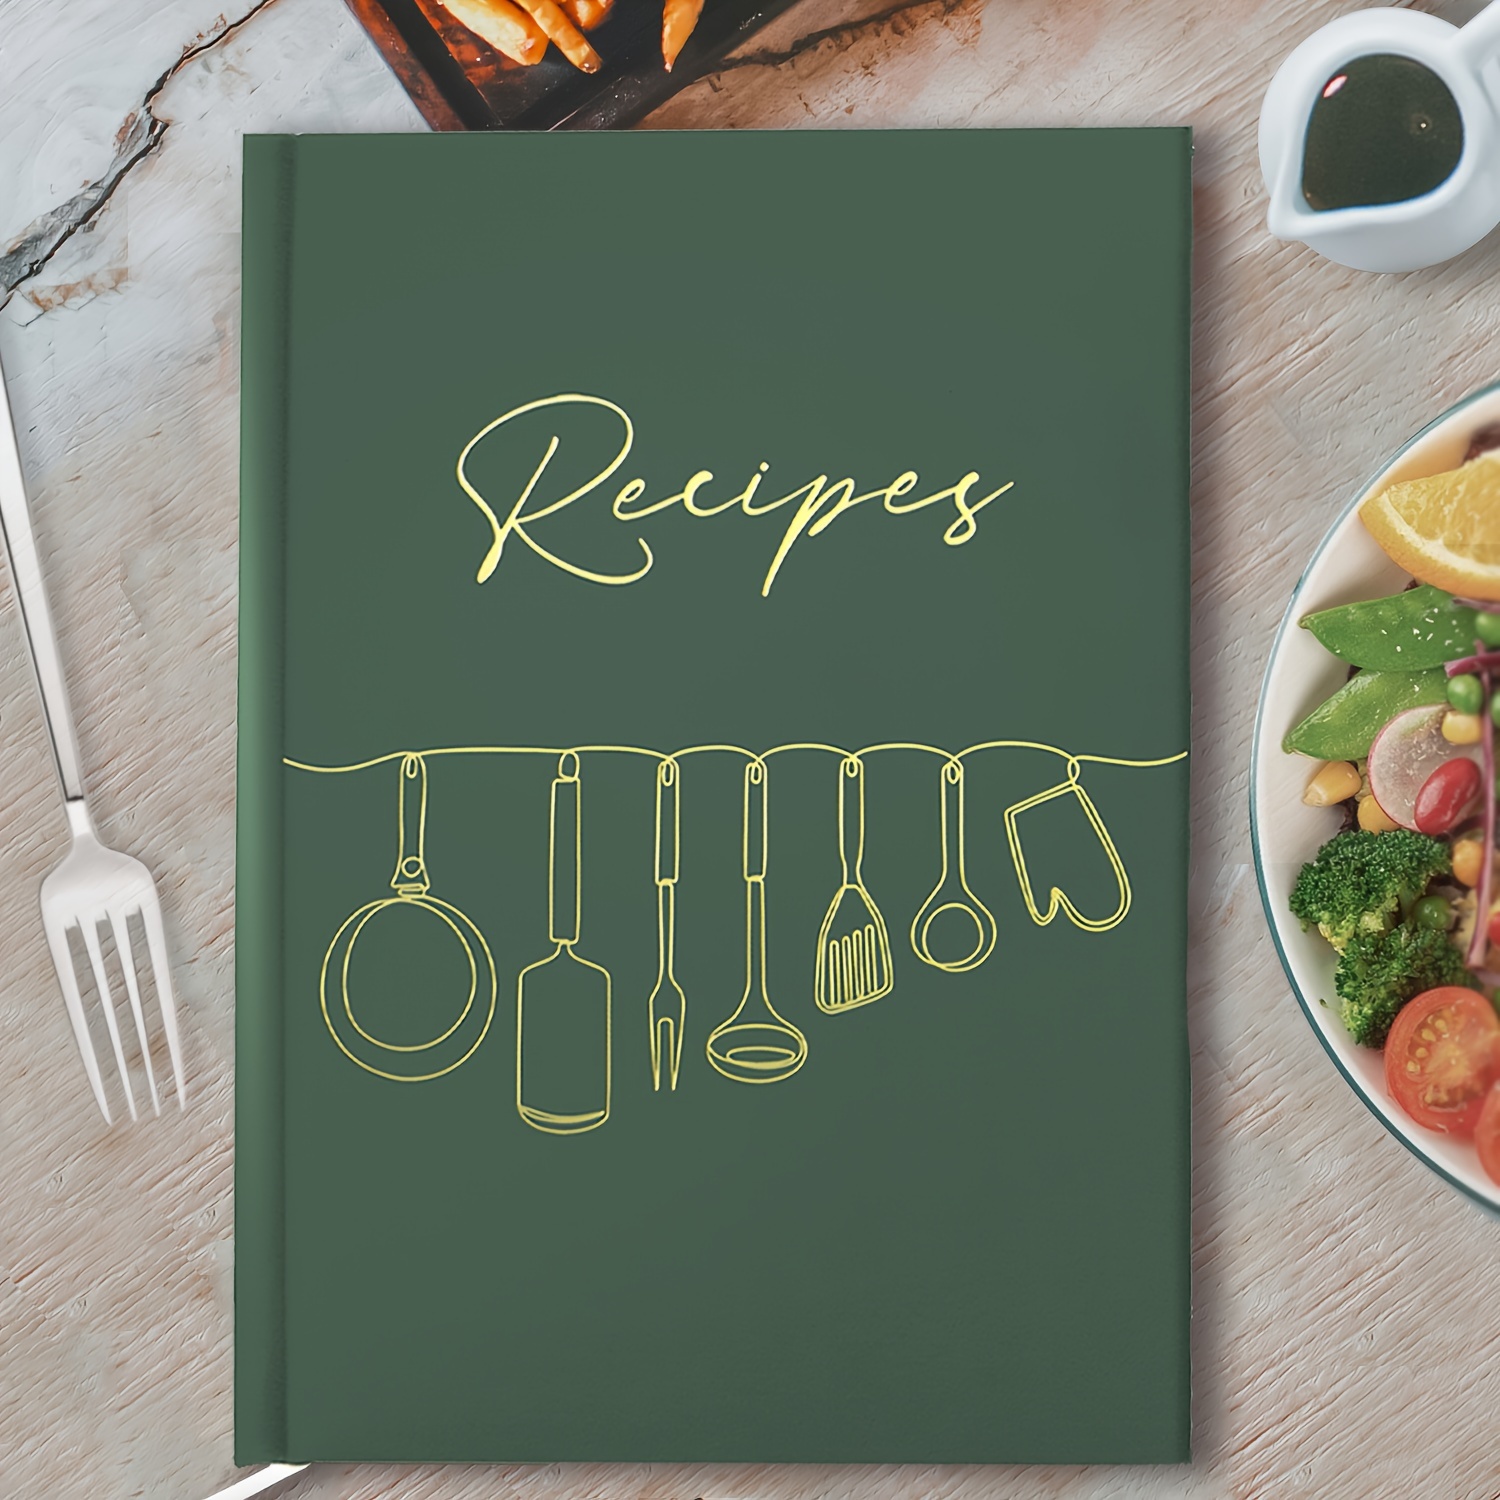 

Blank Recipe Journal: Write Your Own Recipes - Hardcover Notebook With Original Designs